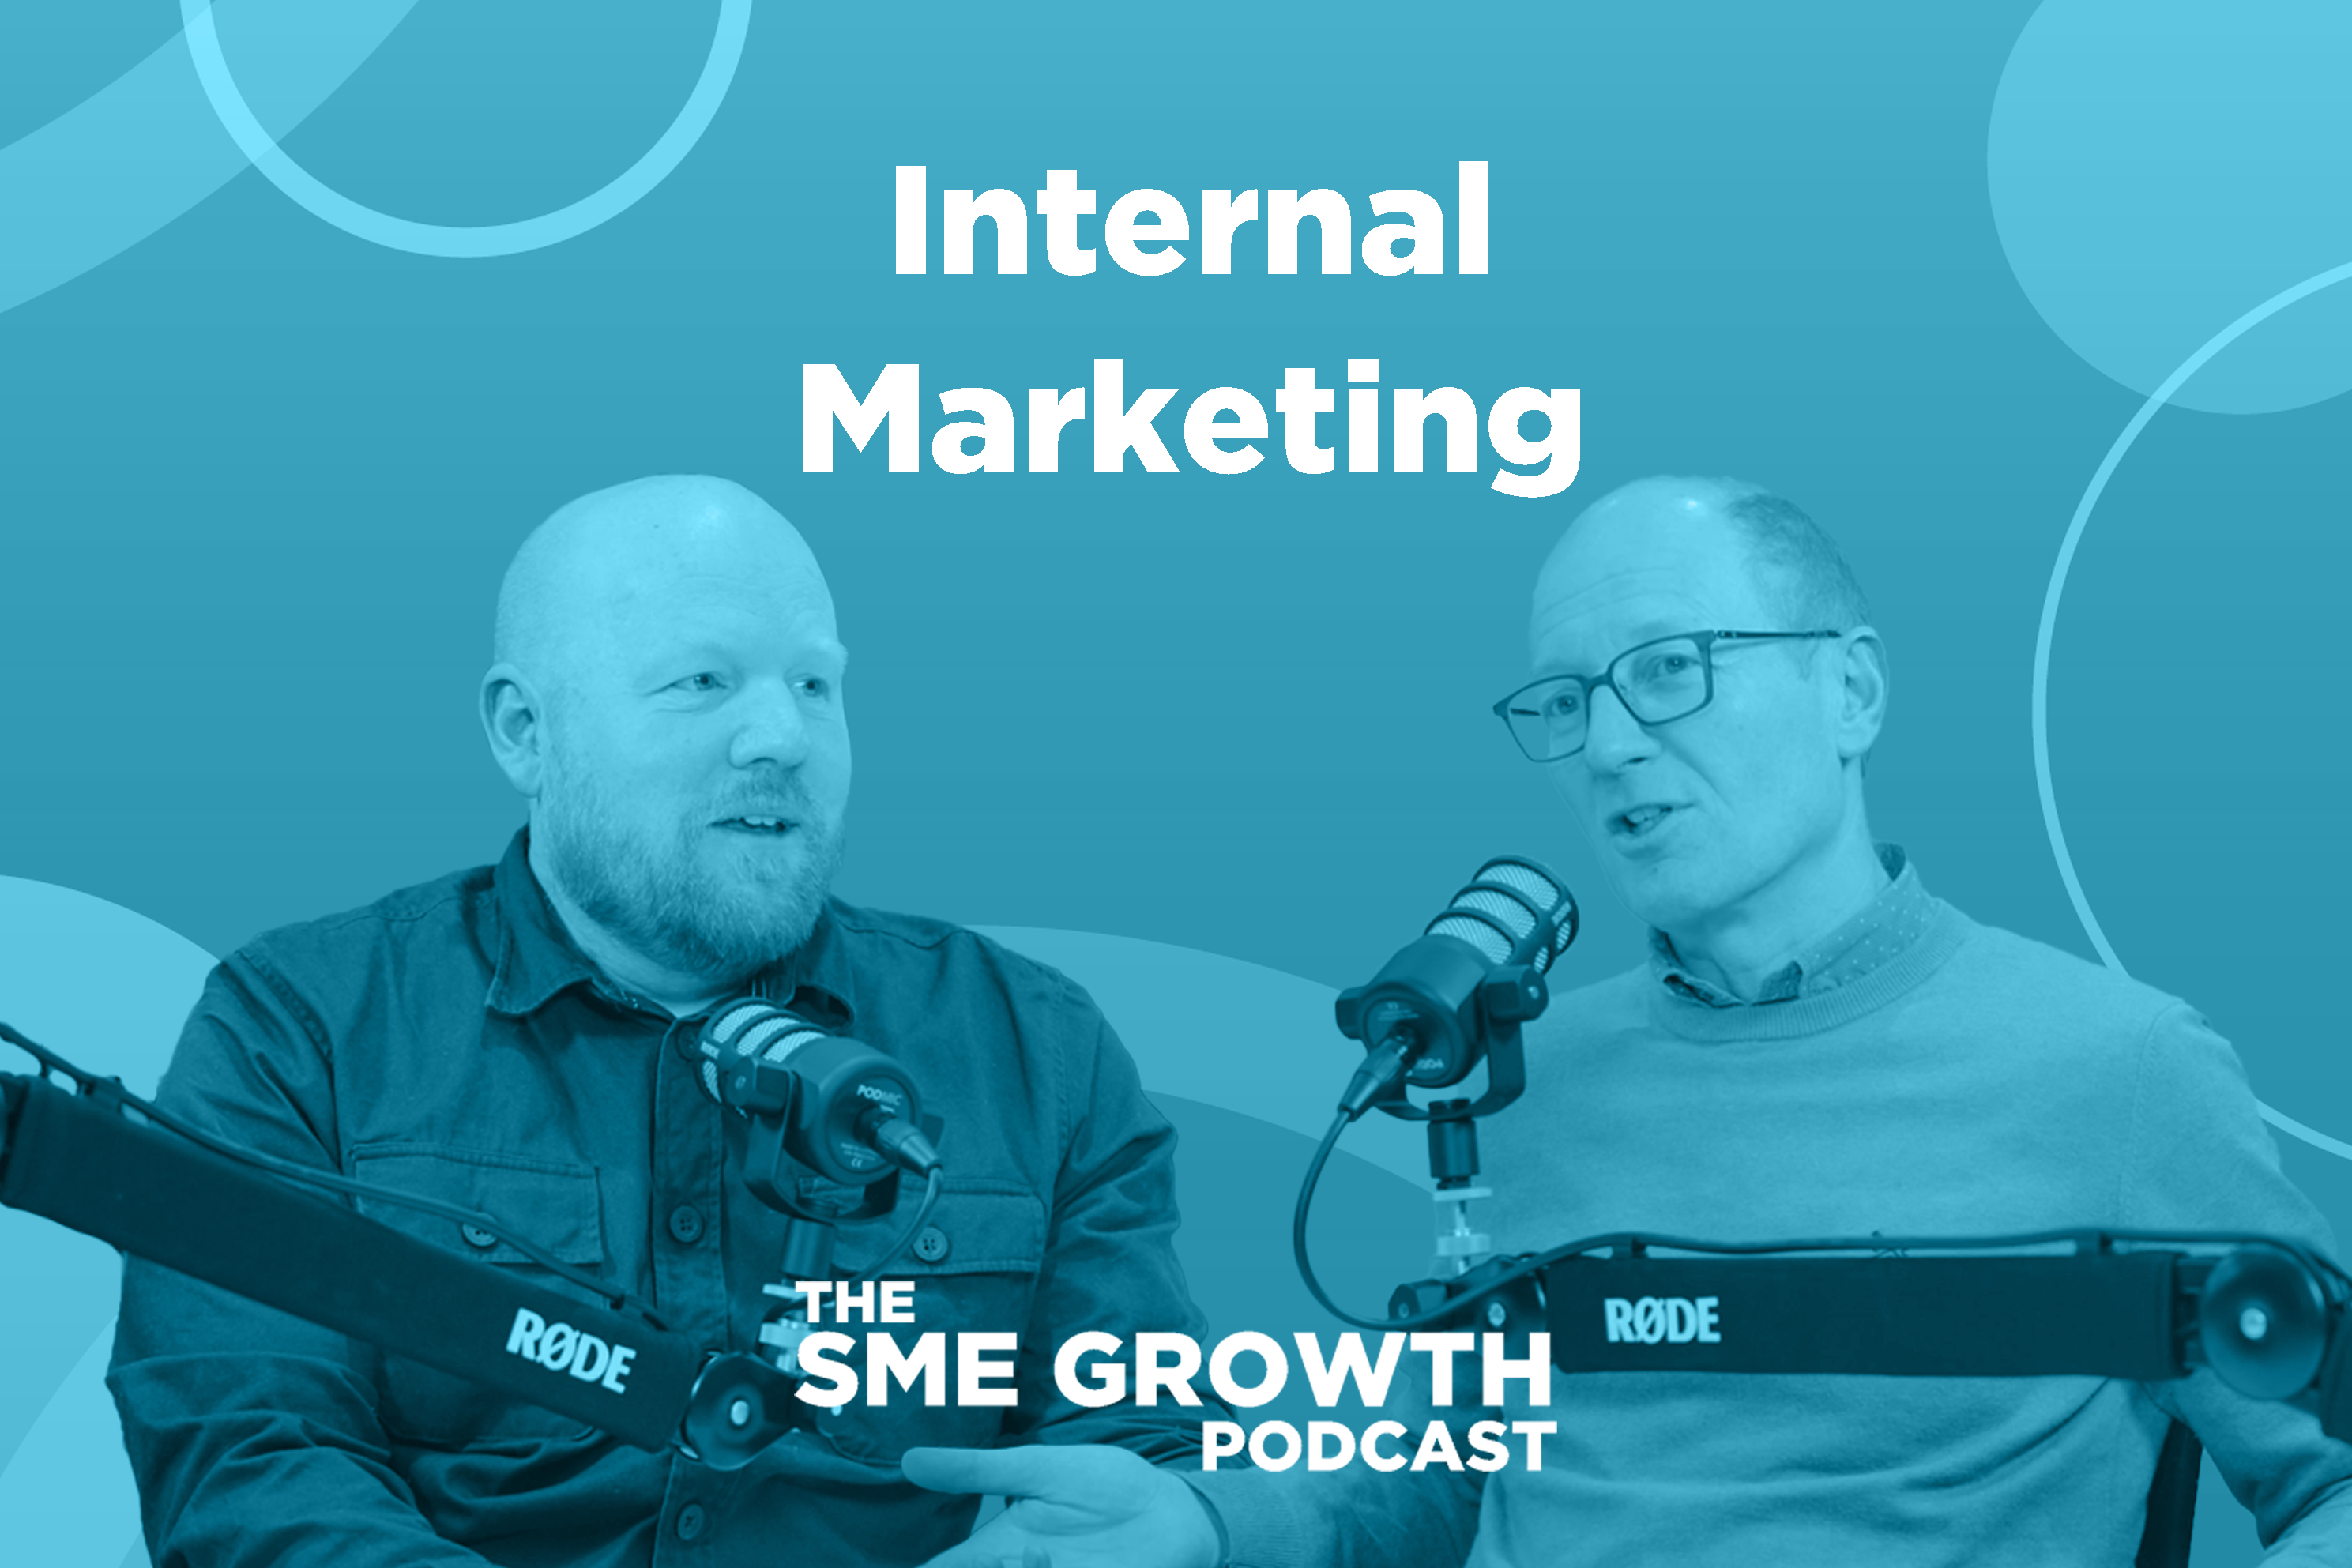 Internal Marketing The SME Growth Podcast. Two males on blu e background talk into microphones.